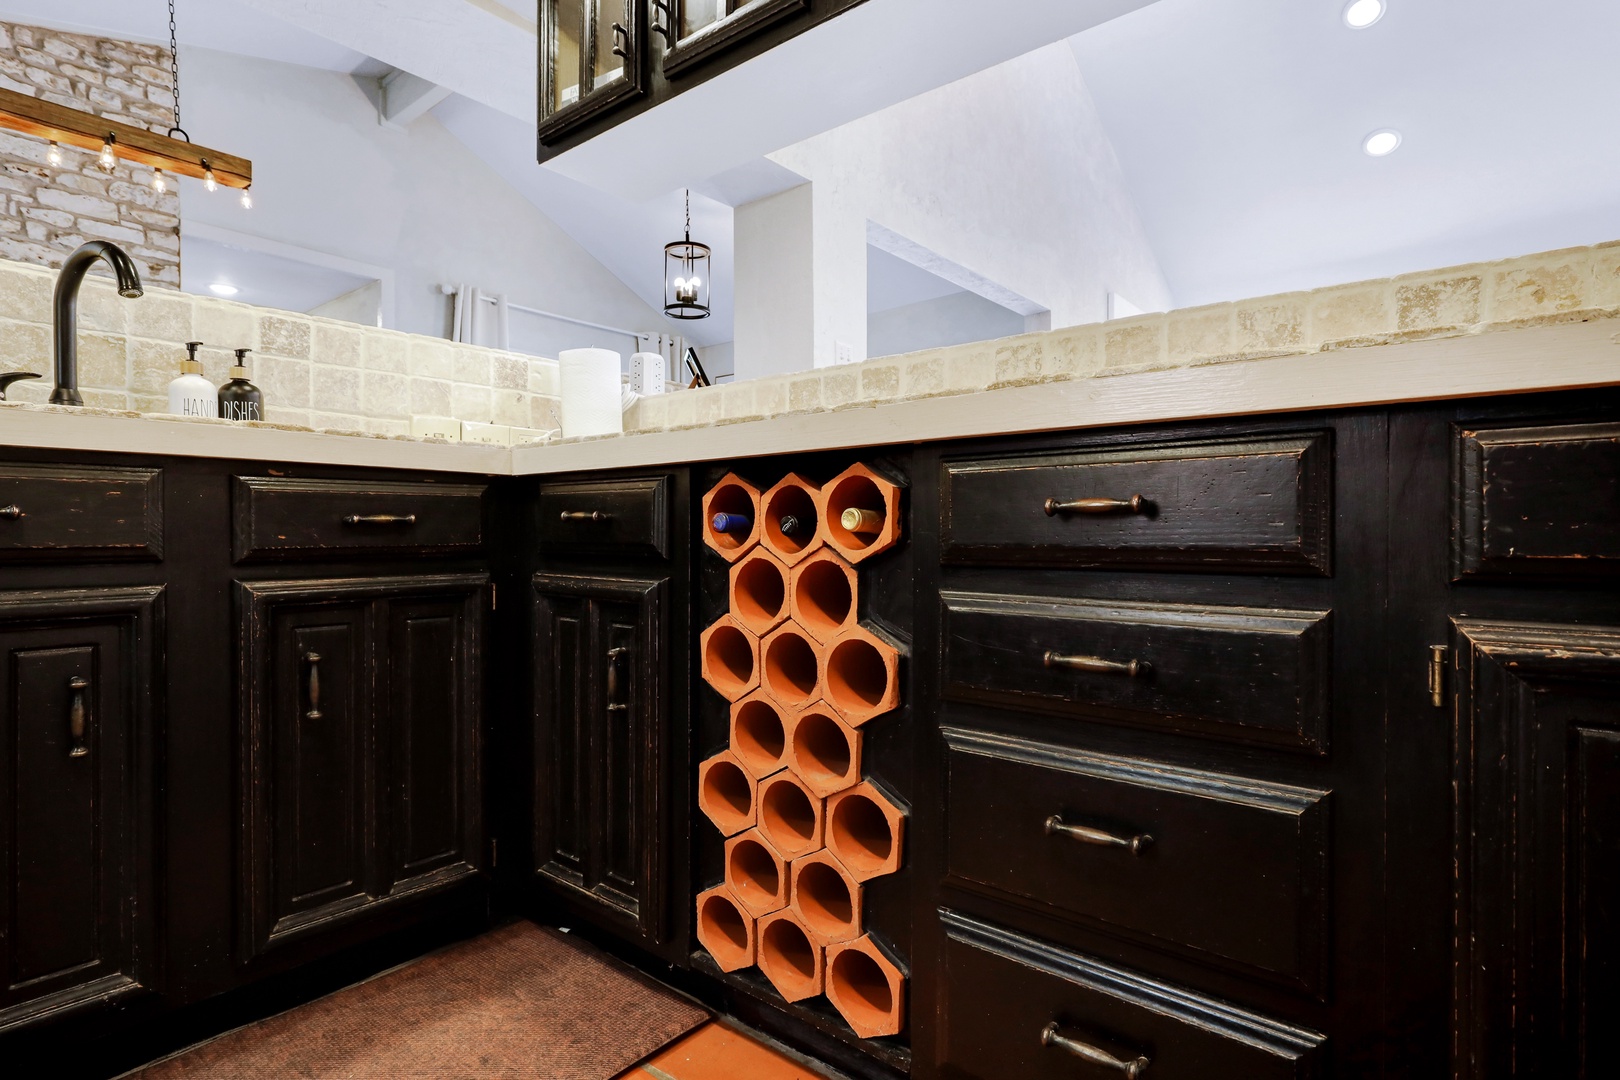 Wine lovers, rejoice! The kitchen offers ample space for bottle storage